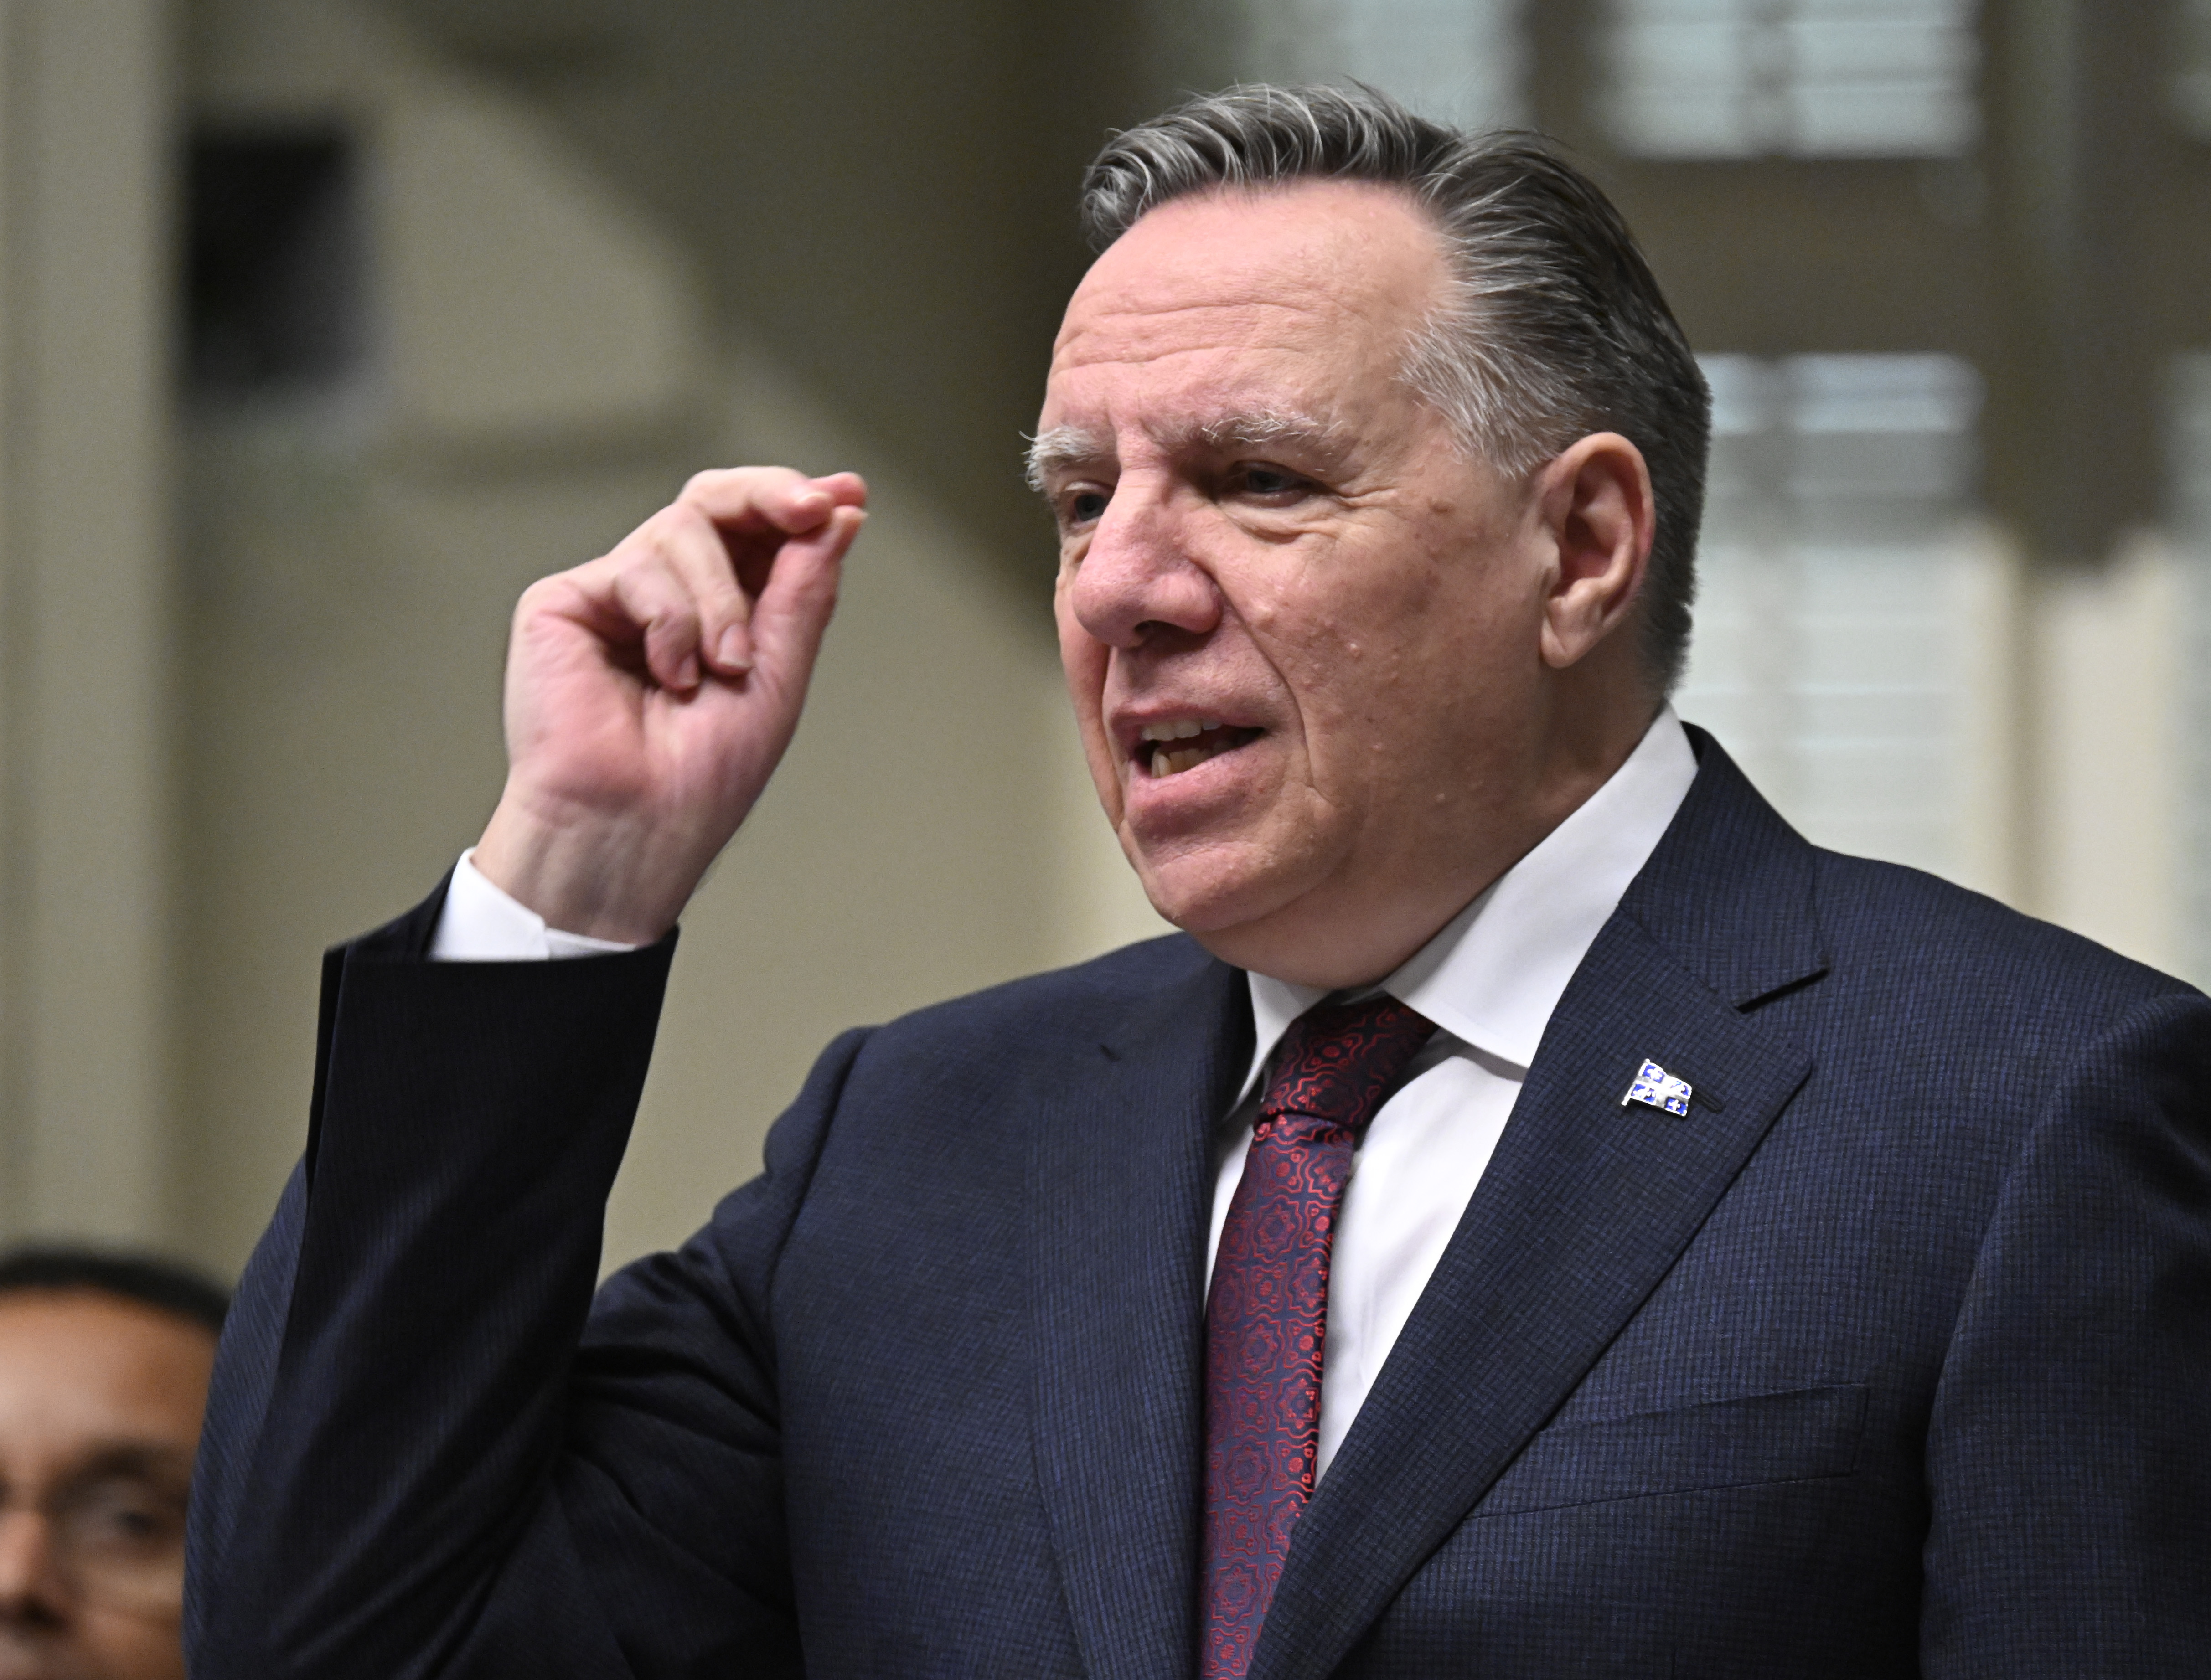 Quebec nearing ‘breaking point’ amid influx of asylum seekers: Legault